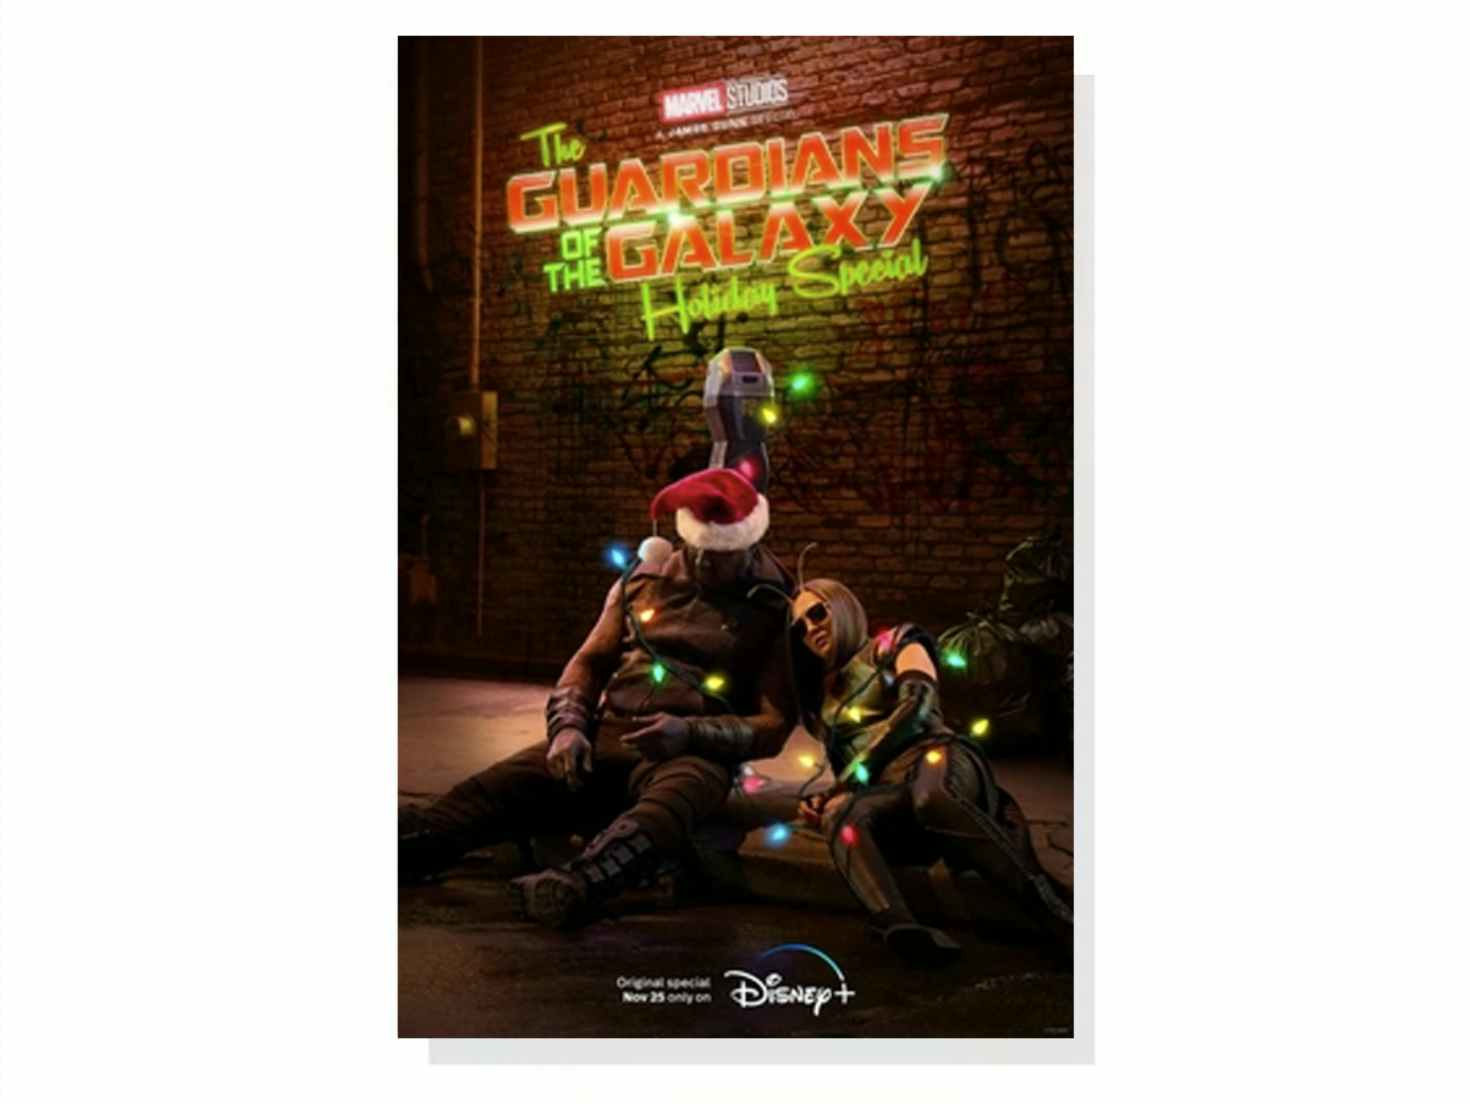 Movie poster for the Guardians of the Galaxy Holiday Special, one of the best Christmas movies on Disney Plus.